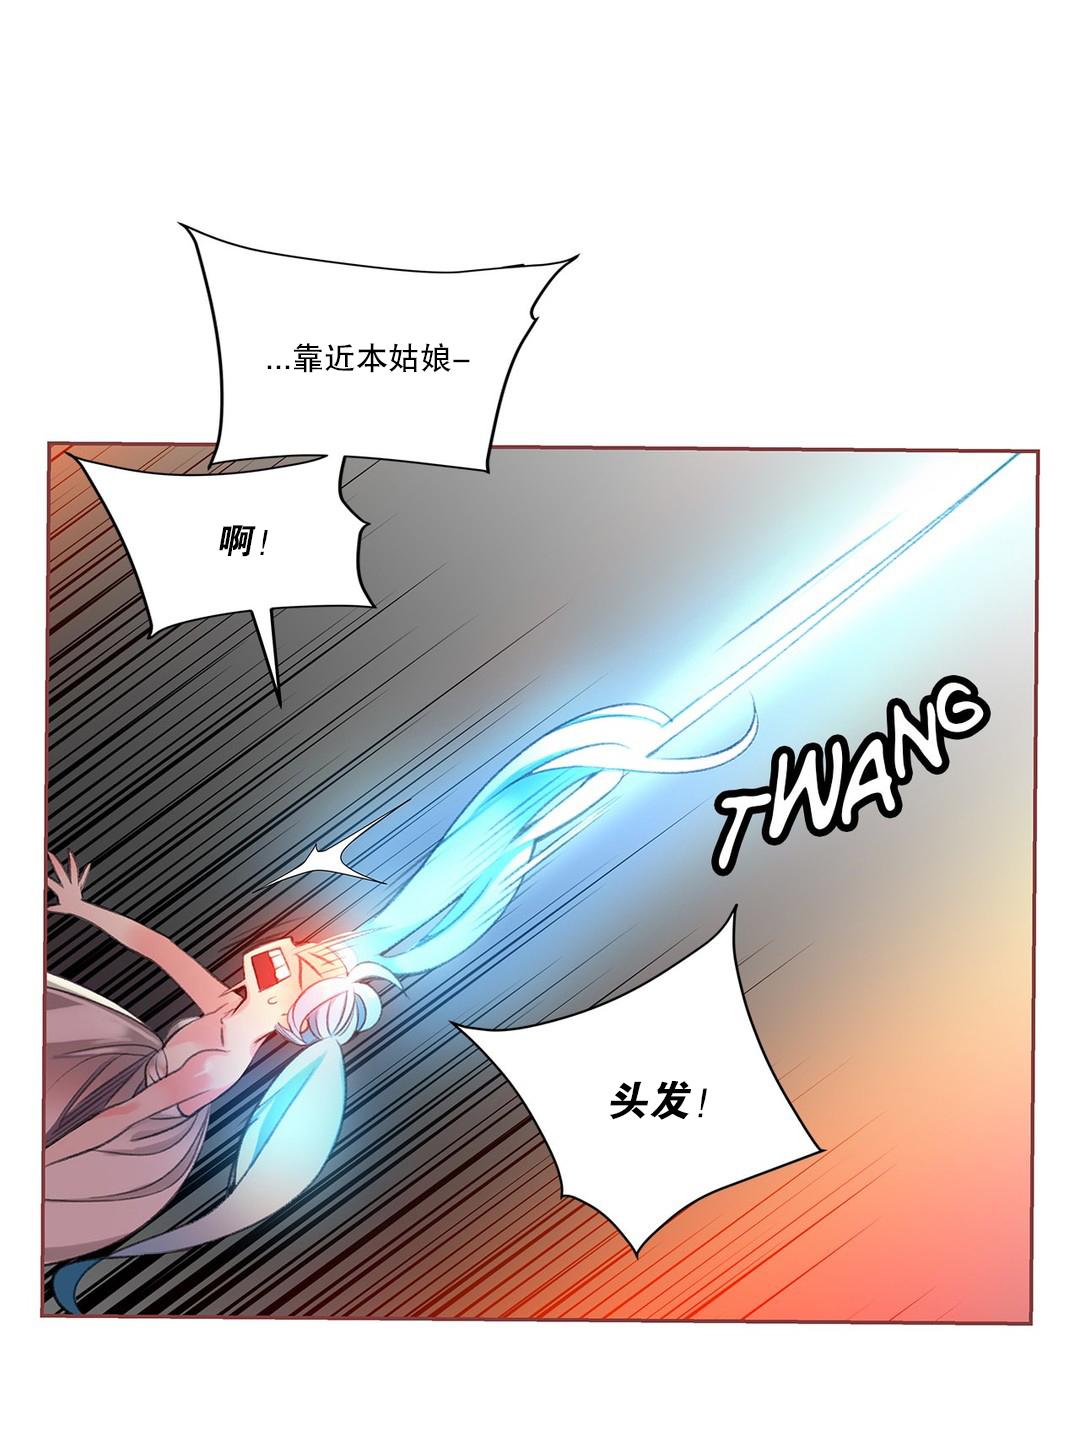 [Juder] Lilith`s Cord (第二季) Ch.61-62 [Chinese] [aaatwist个人汉化] [Ongoing] 9